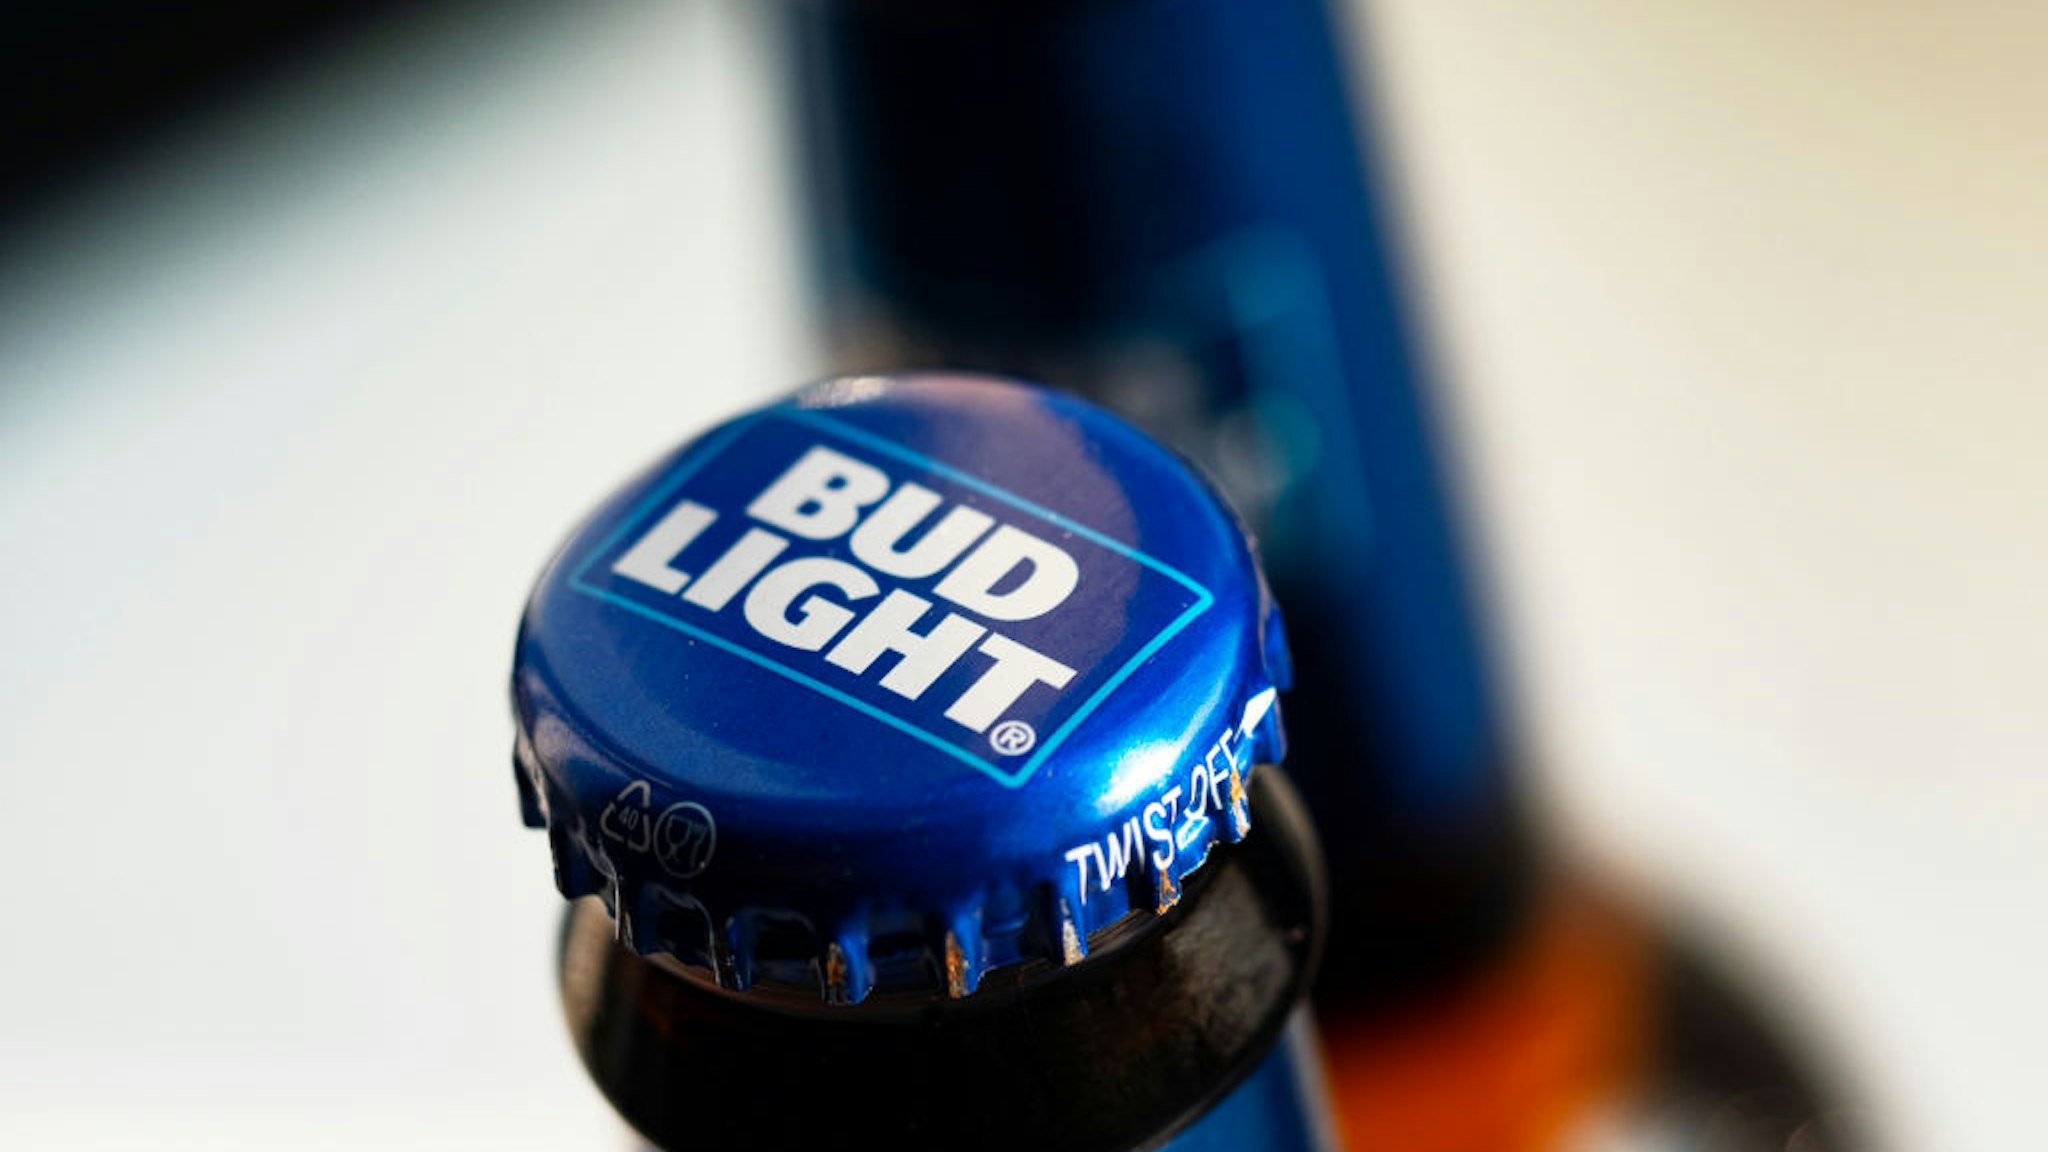 UKRAINE - 2021/08/27: In this photo illustration, the Bud Light beer bottle seen displayed in a store. This beer is produced by Anheuser-Busch, ink. (Photo Illustration by Igor Golovniov/SOPA Images/LightRocket via Getty Images)